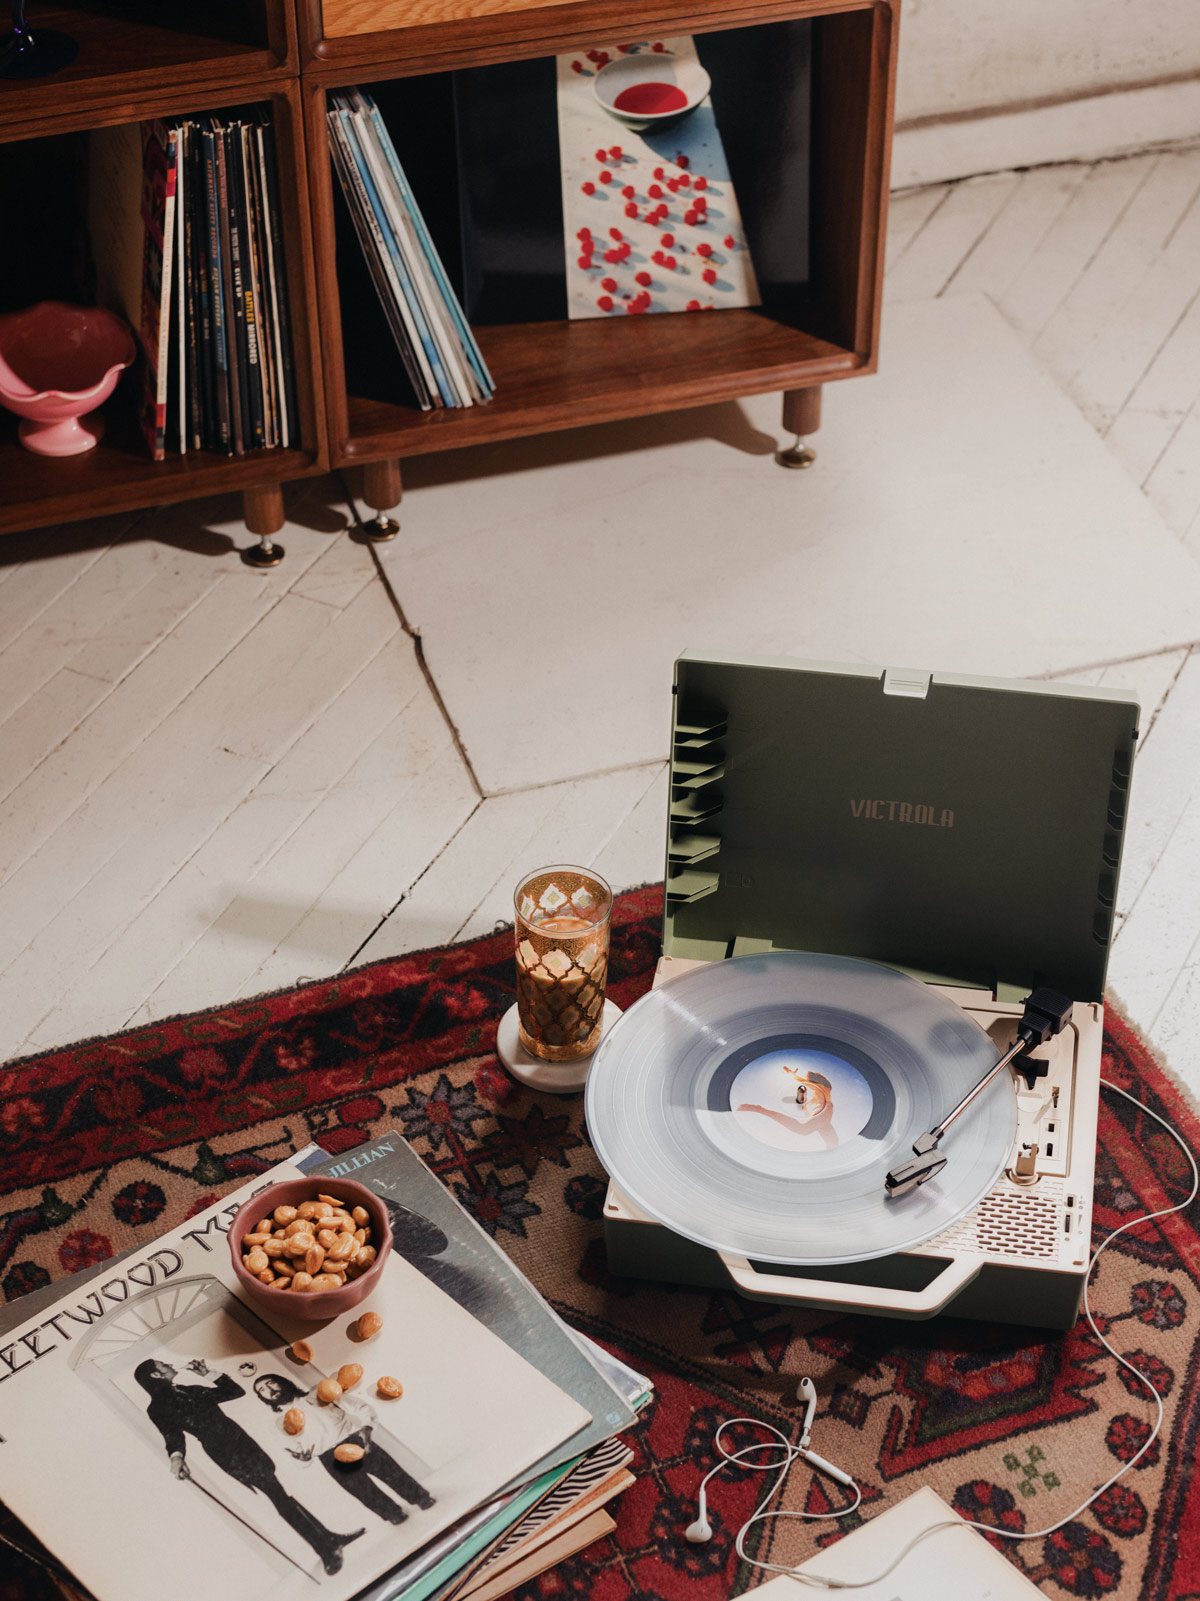 Is Taylor Swift bringing vinyl records back to the mainstream?